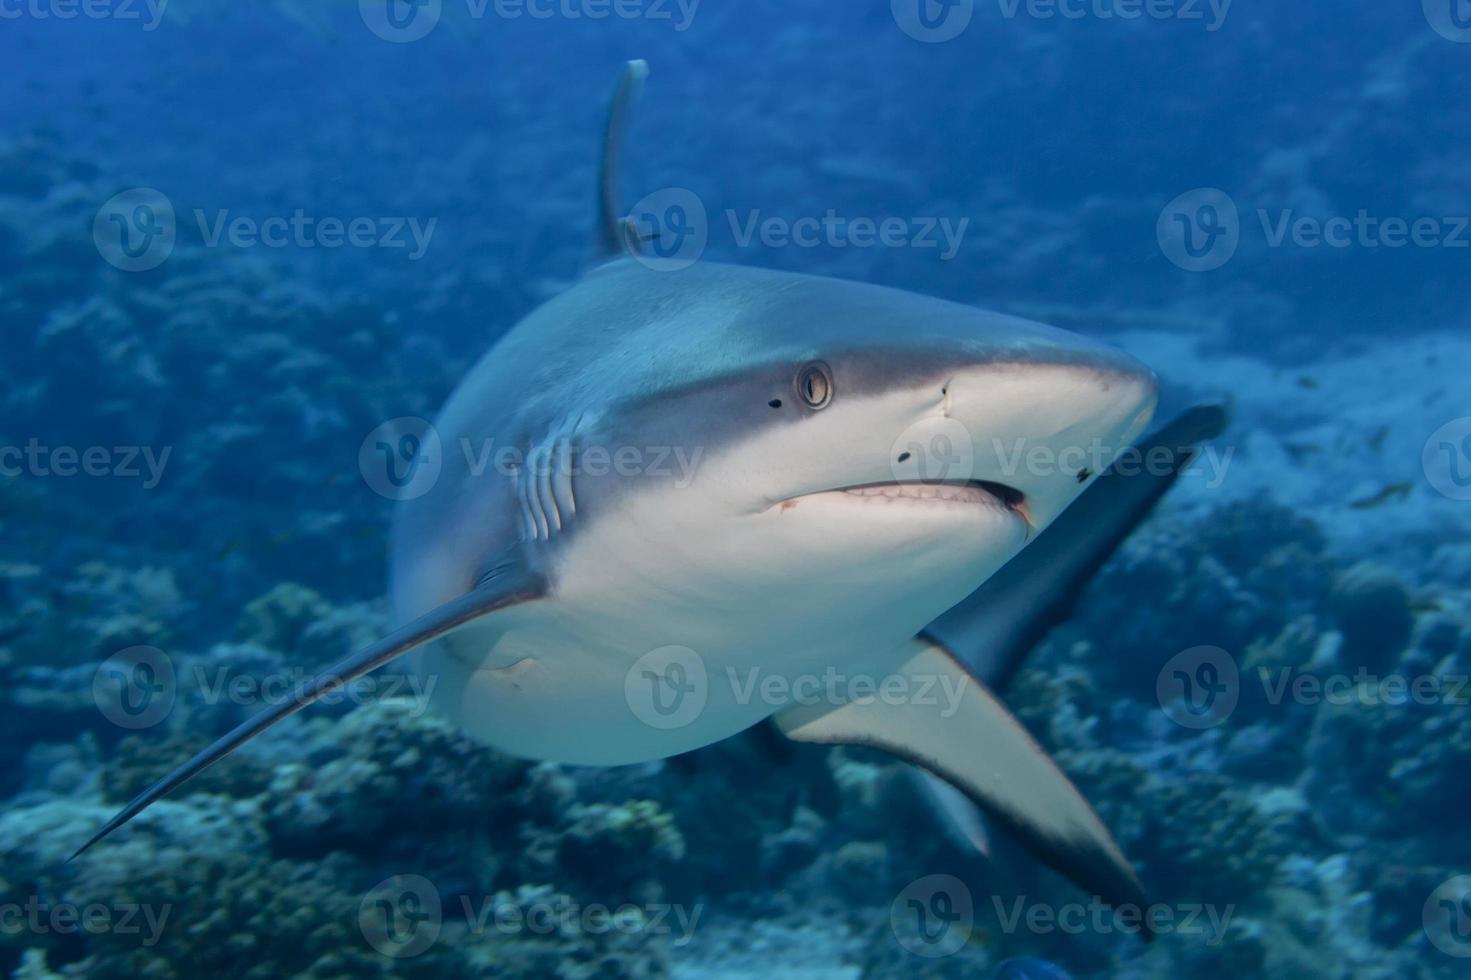 A grey shark jaws ready to attack underwater close up portrait photo